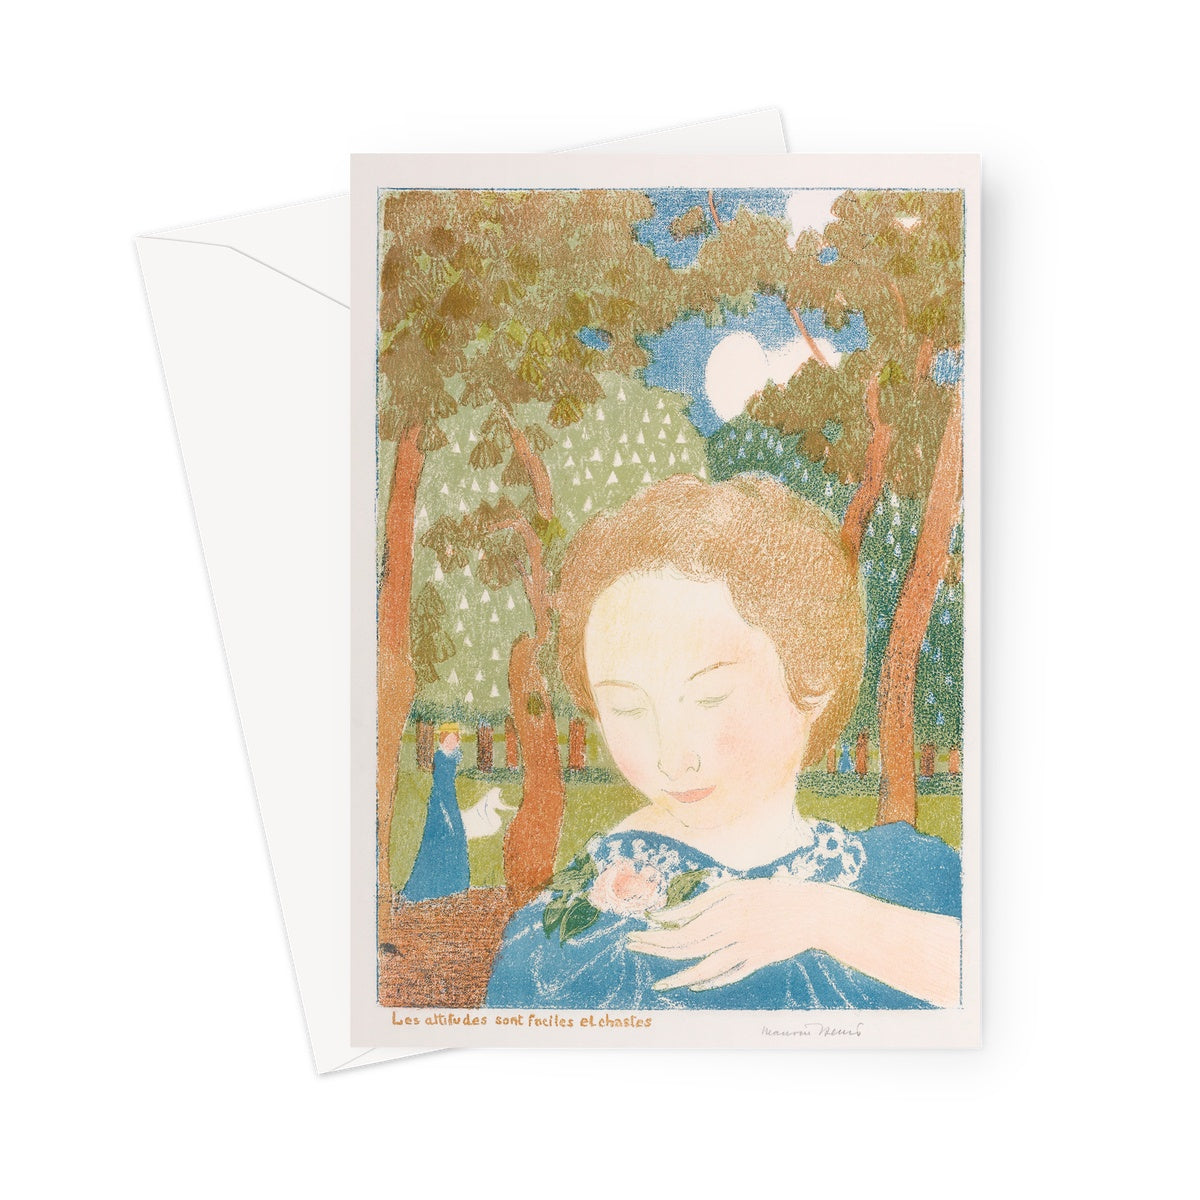 Attitudes are Easy and Chaste by Maurice Denis, 1899 - Greeting Card